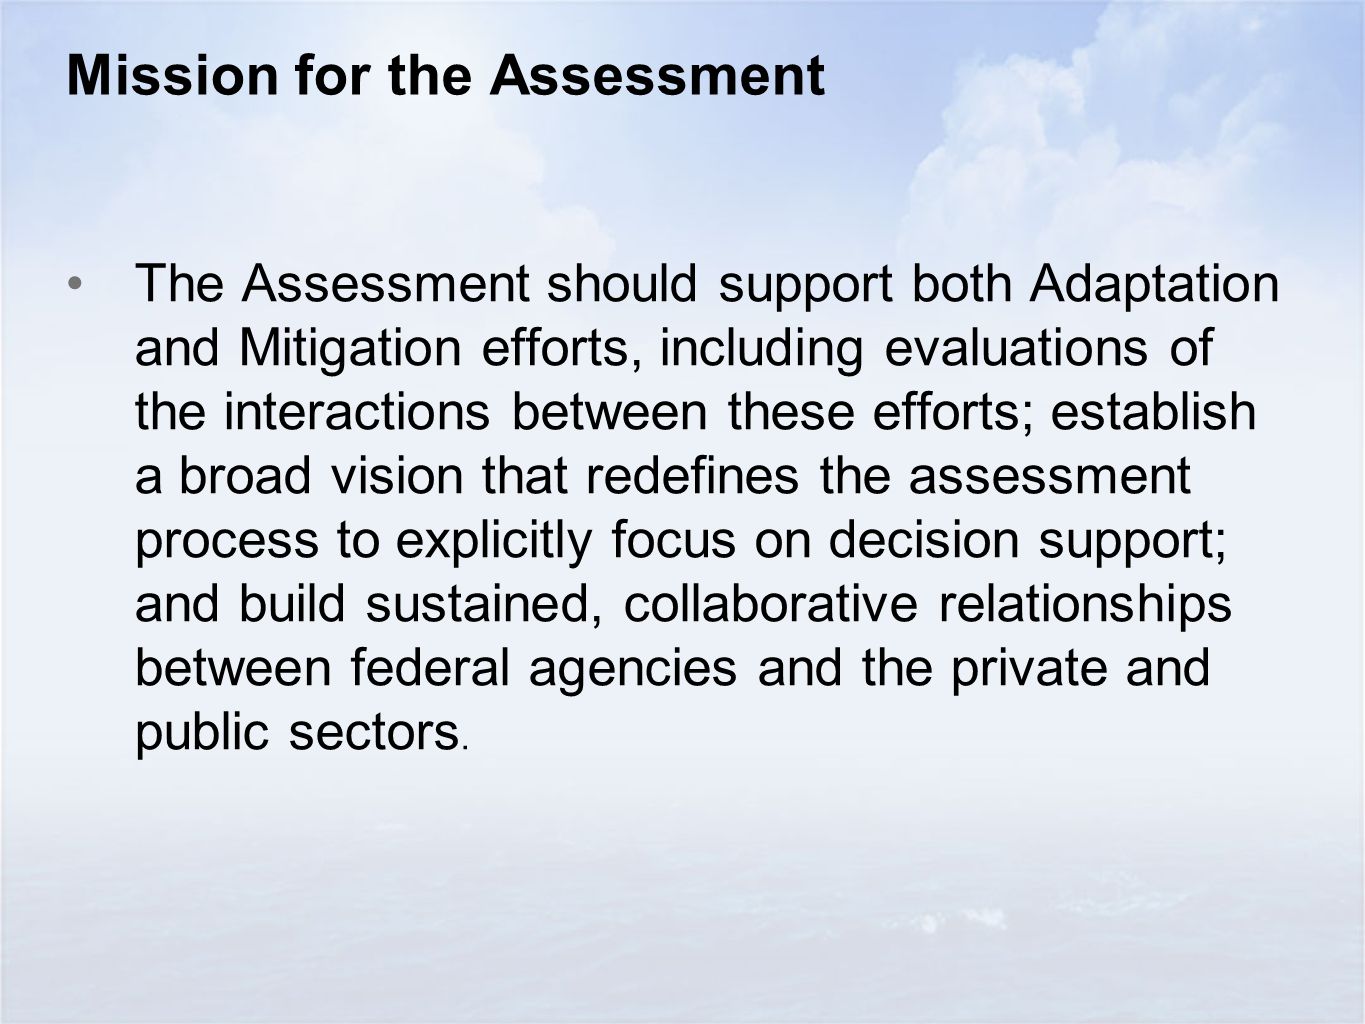 Mission for the Assessment The Assessment should support both Adaptation and Mitigation efforts, including evaluations of the interactions between these efforts; establish a broad vision that redefines the assessment process to explicitly focus on decision support; and build sustained, collaborative relationships between federal agencies and the private and public sectors.